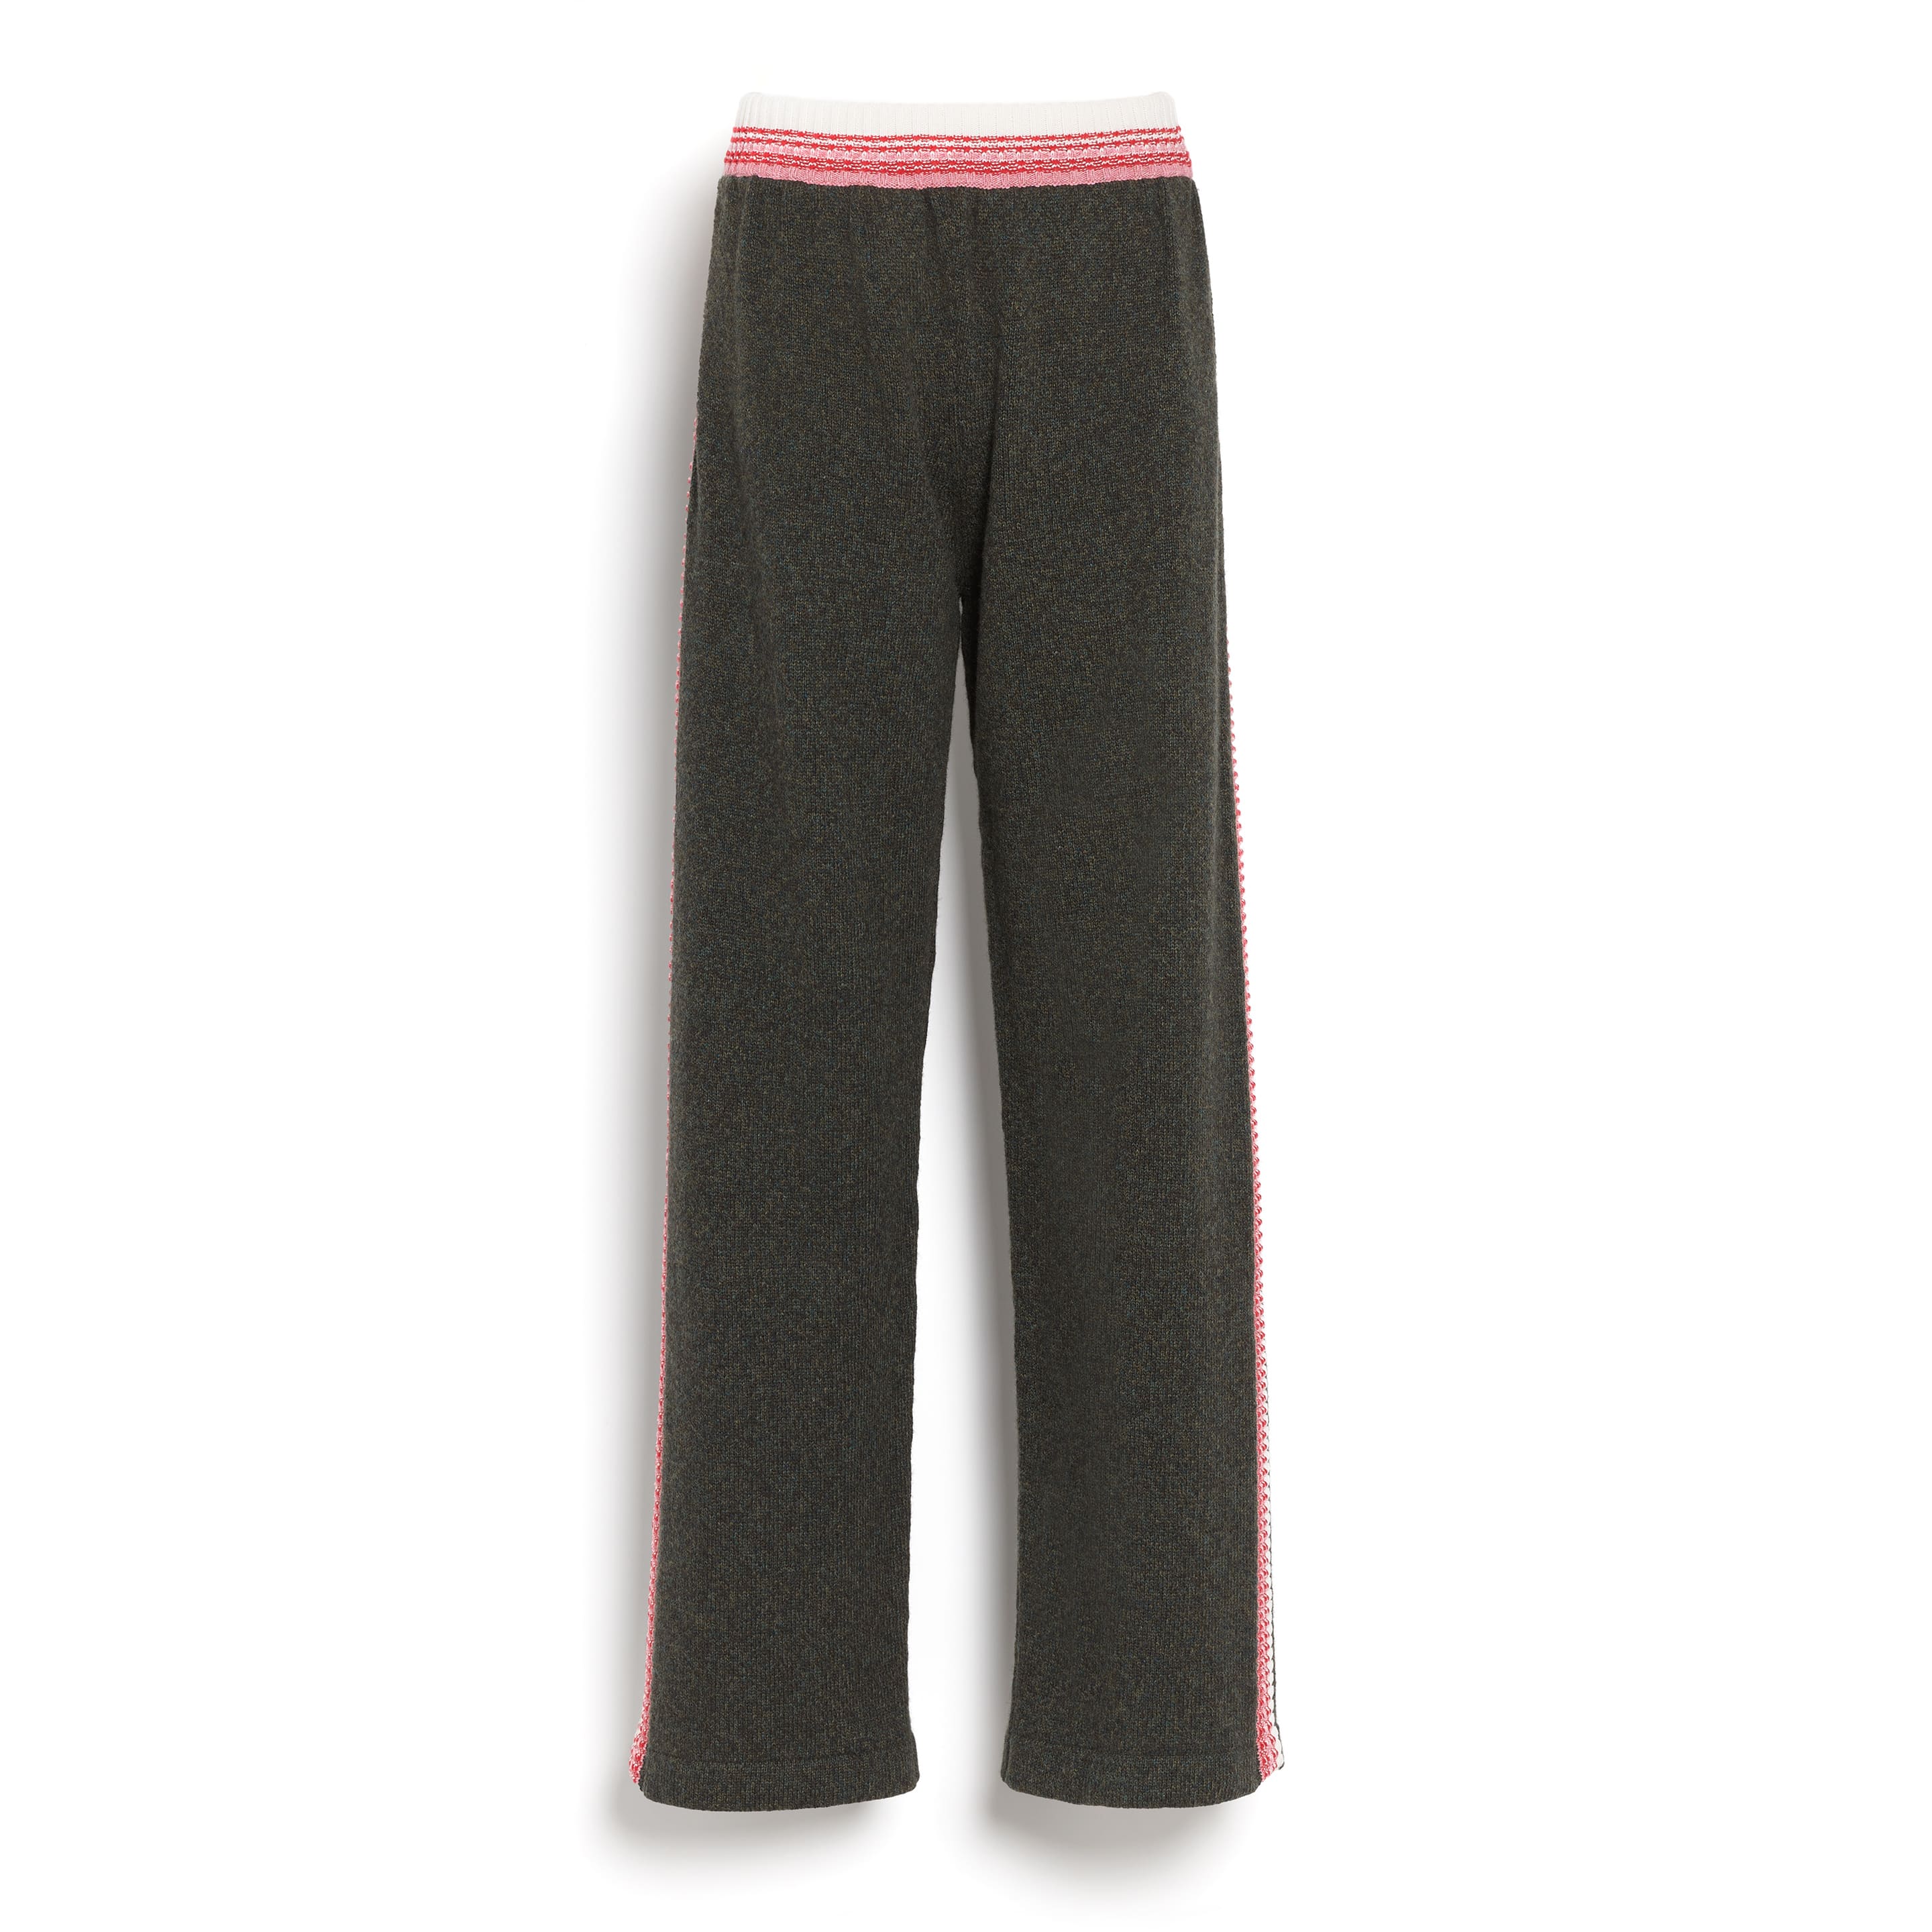 Trousers in marled cashmere – Barrie.com